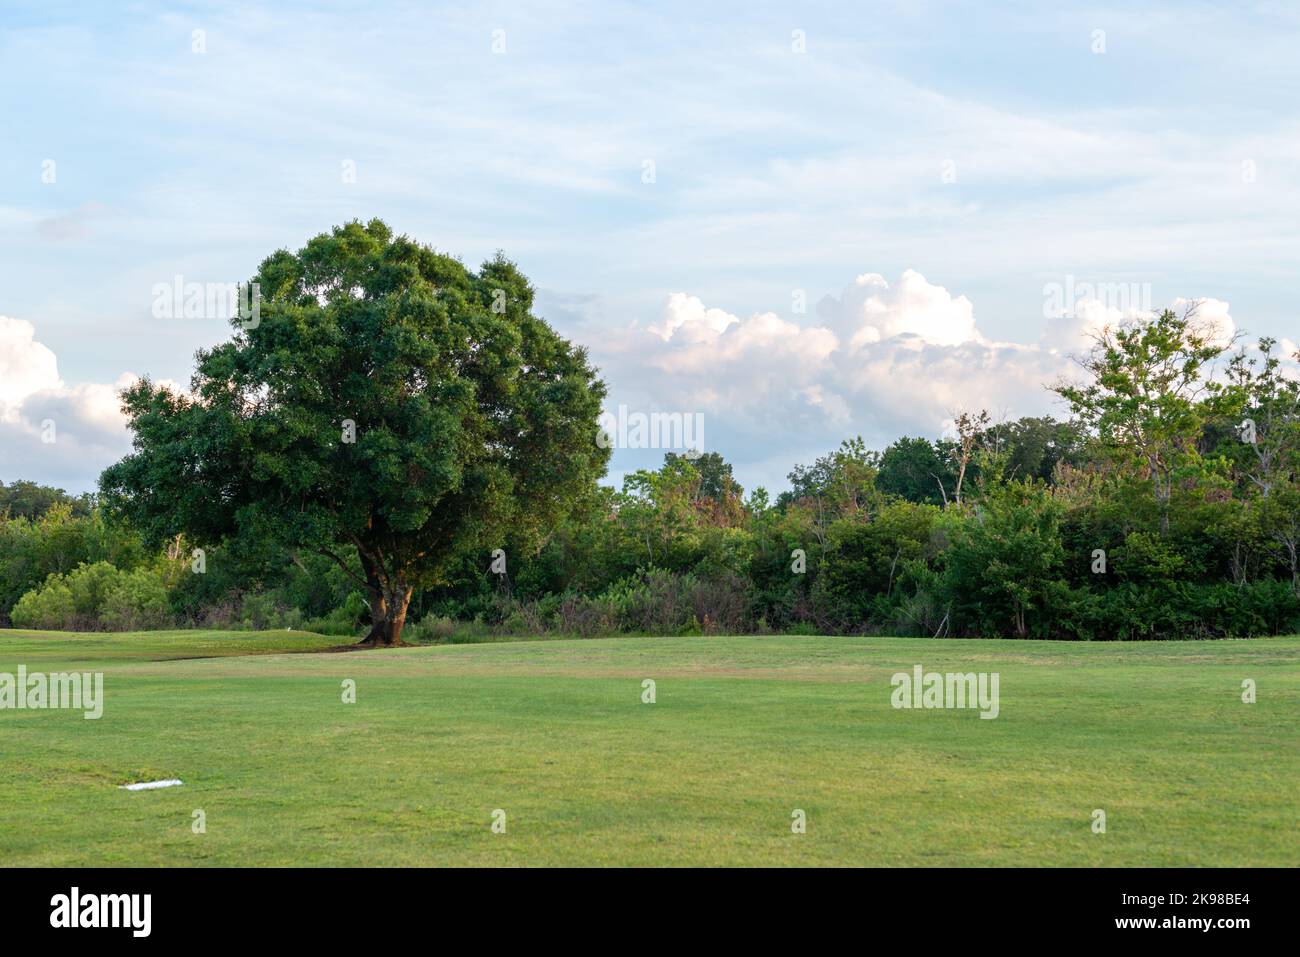 A golf course green with vibrant low cut green grass and a large thick cypress tree covered in green leaves. The background is a blue sky with clouds. Stock Photo